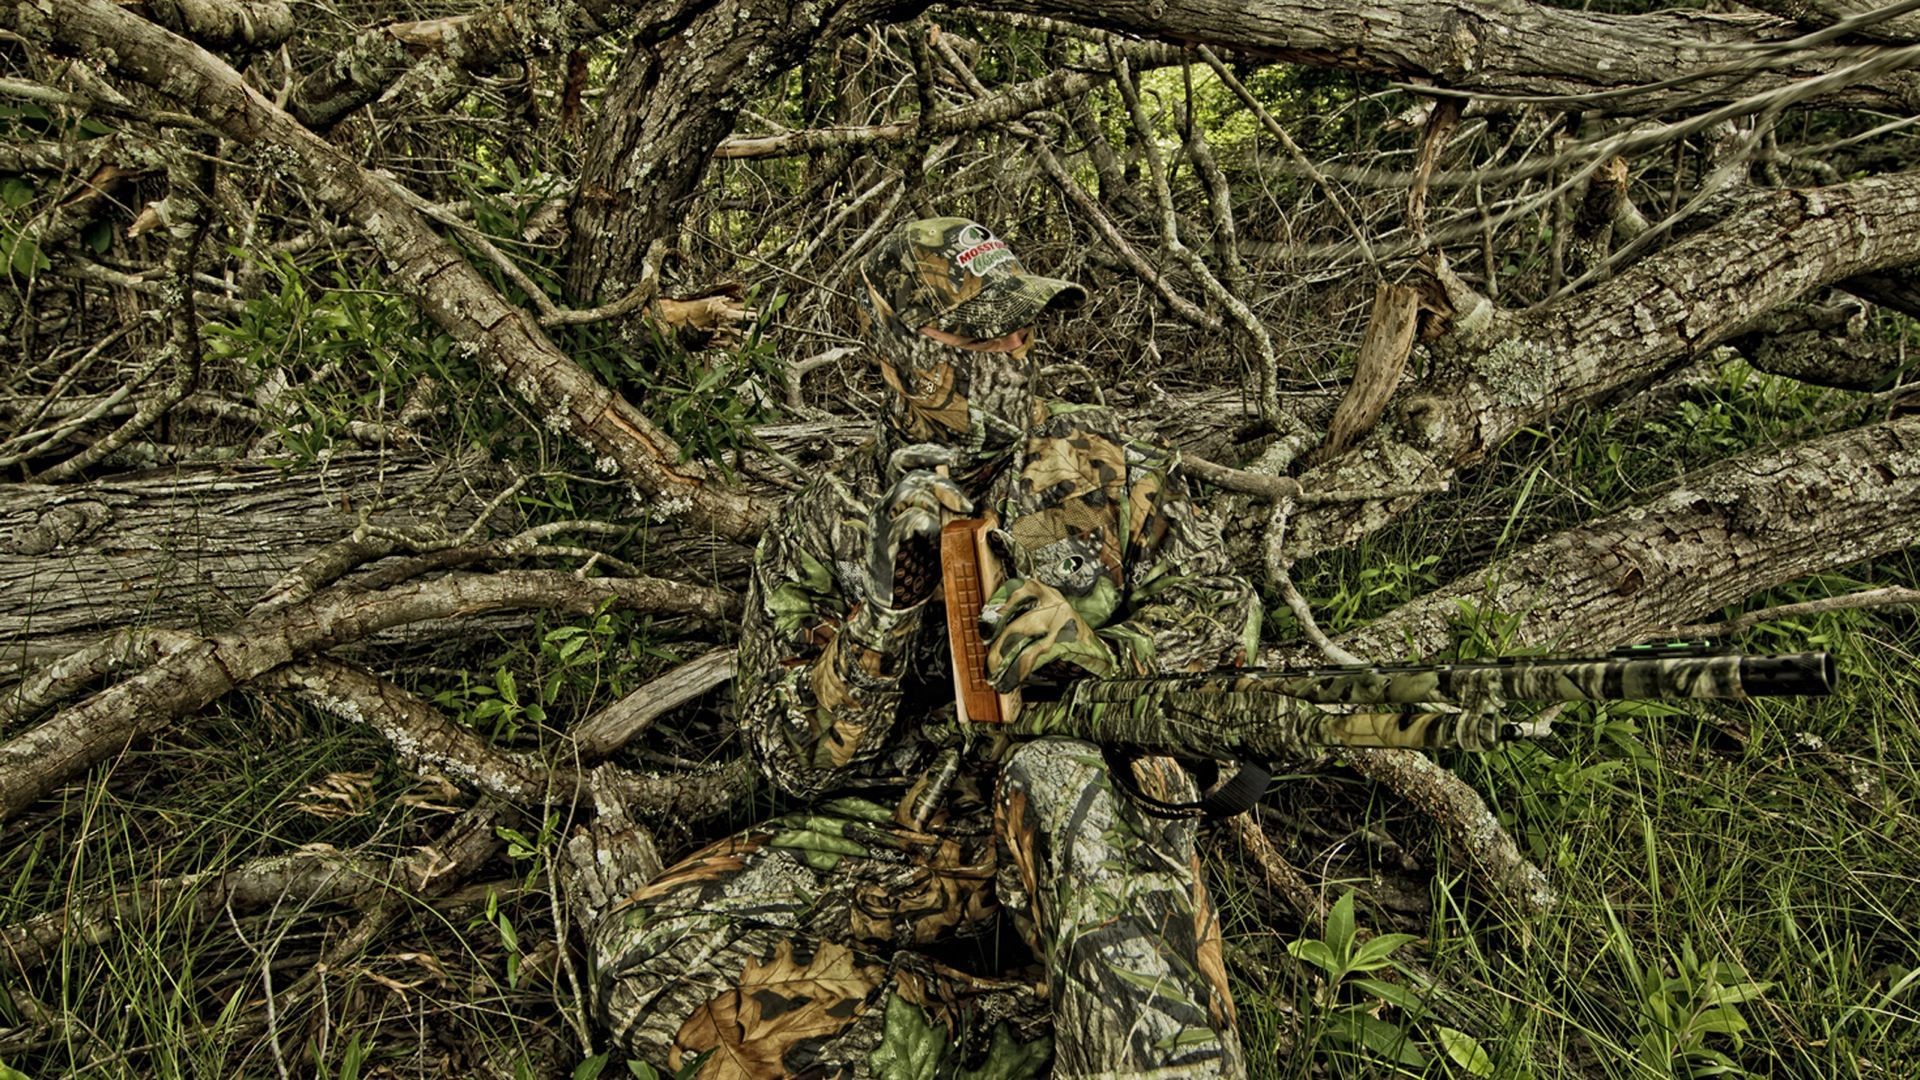 1920x1080 How to Hide and Use Camouflage | Hunting Activity